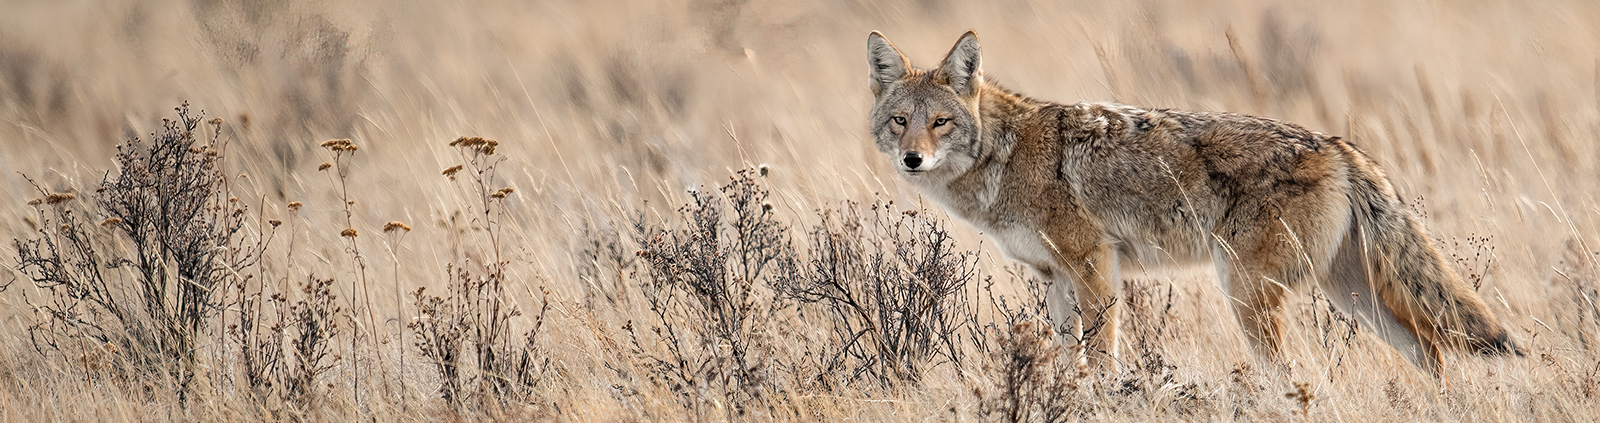 Coyote in tall grass